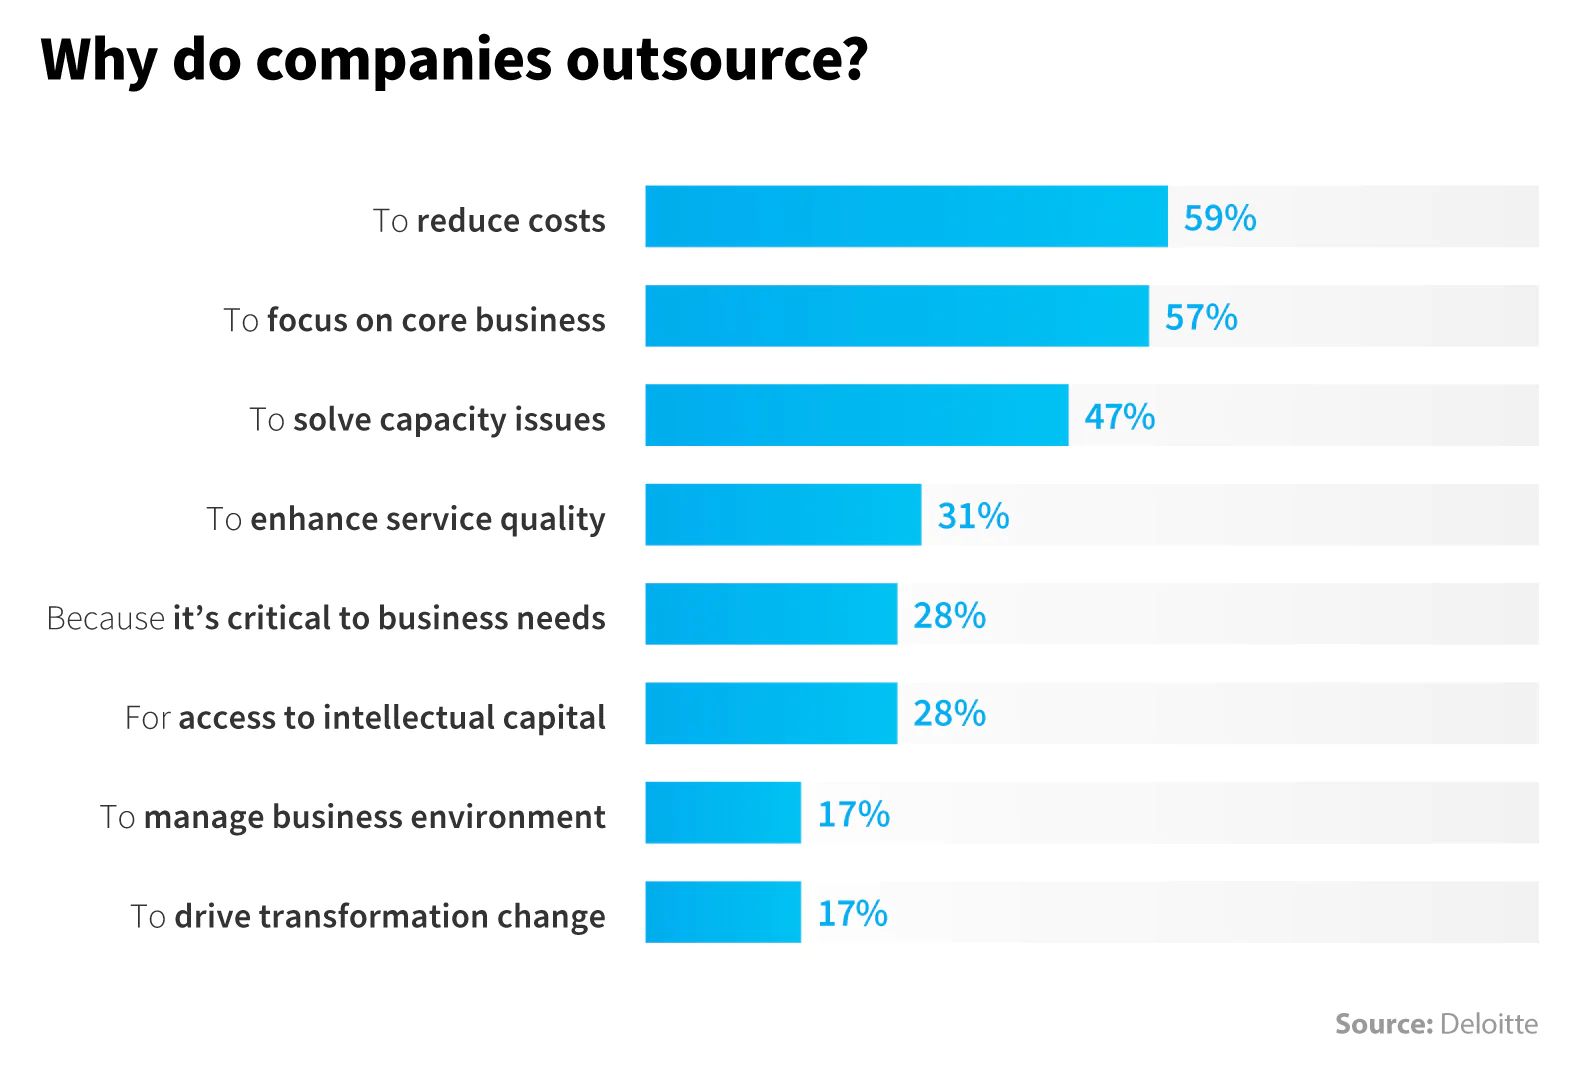 Bar chart showing that cost reduction is the number one reason companies outsource their marketing efforts.